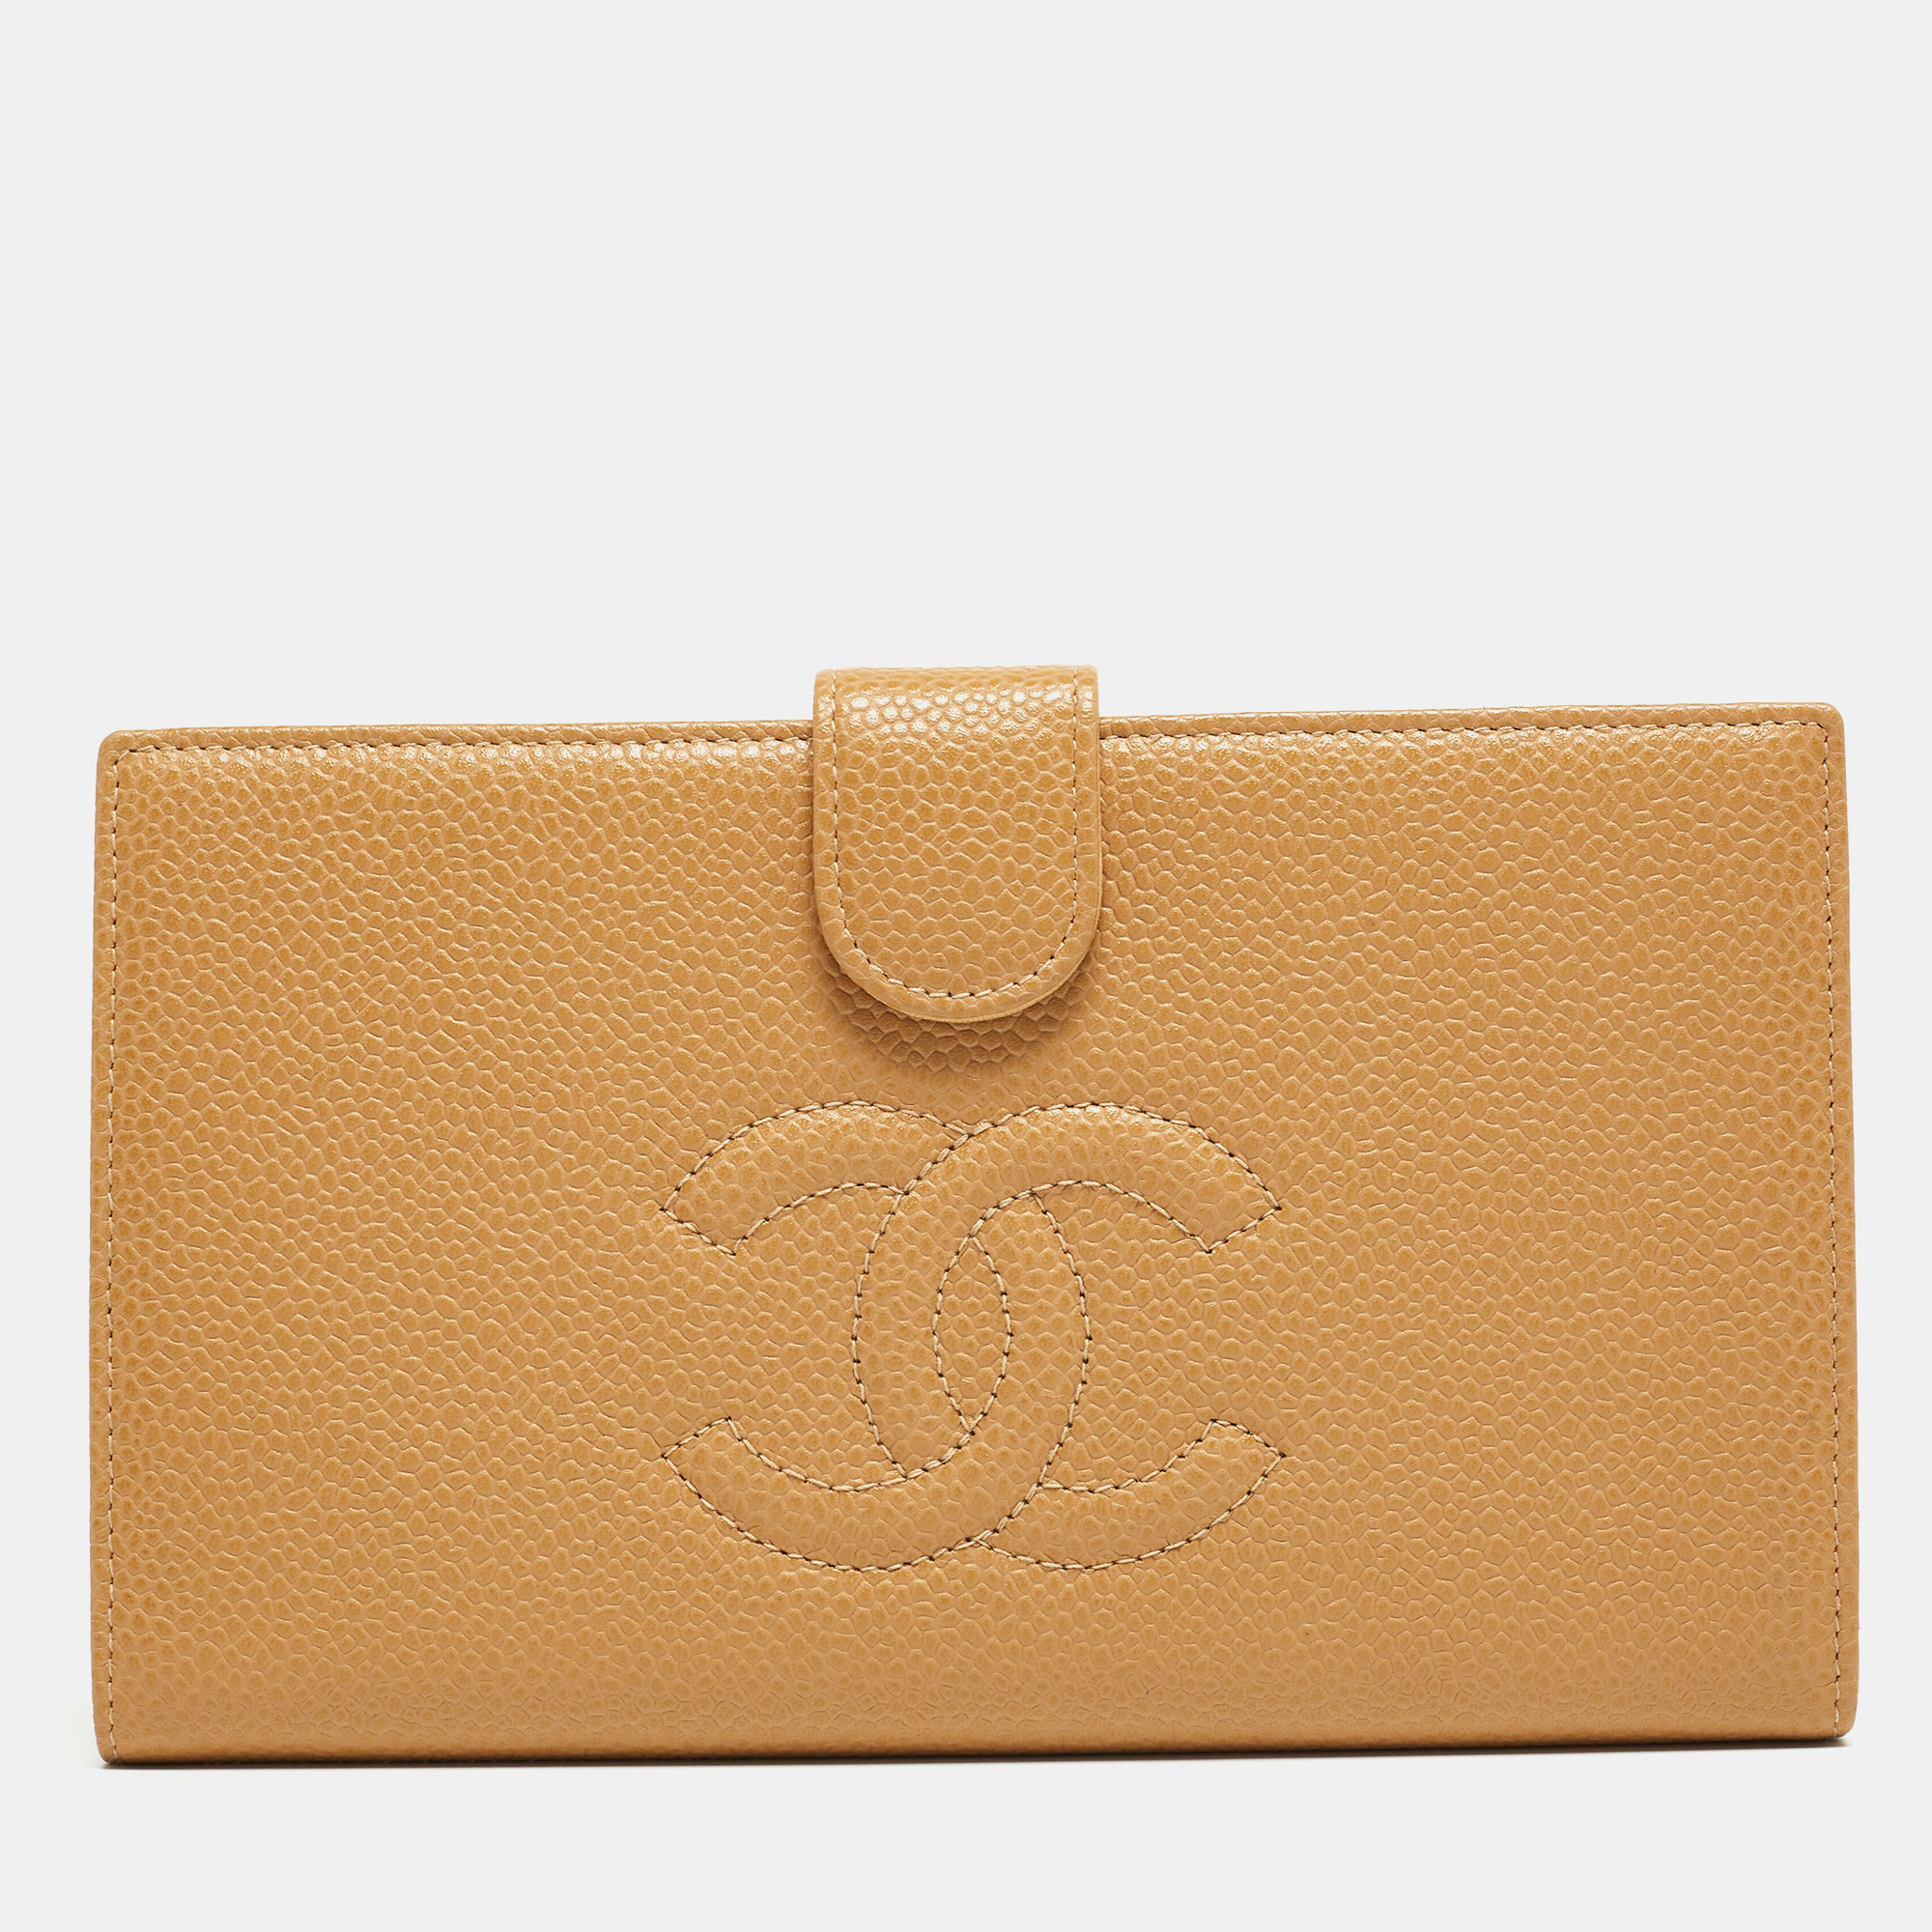 Chanel Beige CC Caviar Leather CC Timeless French Wallet